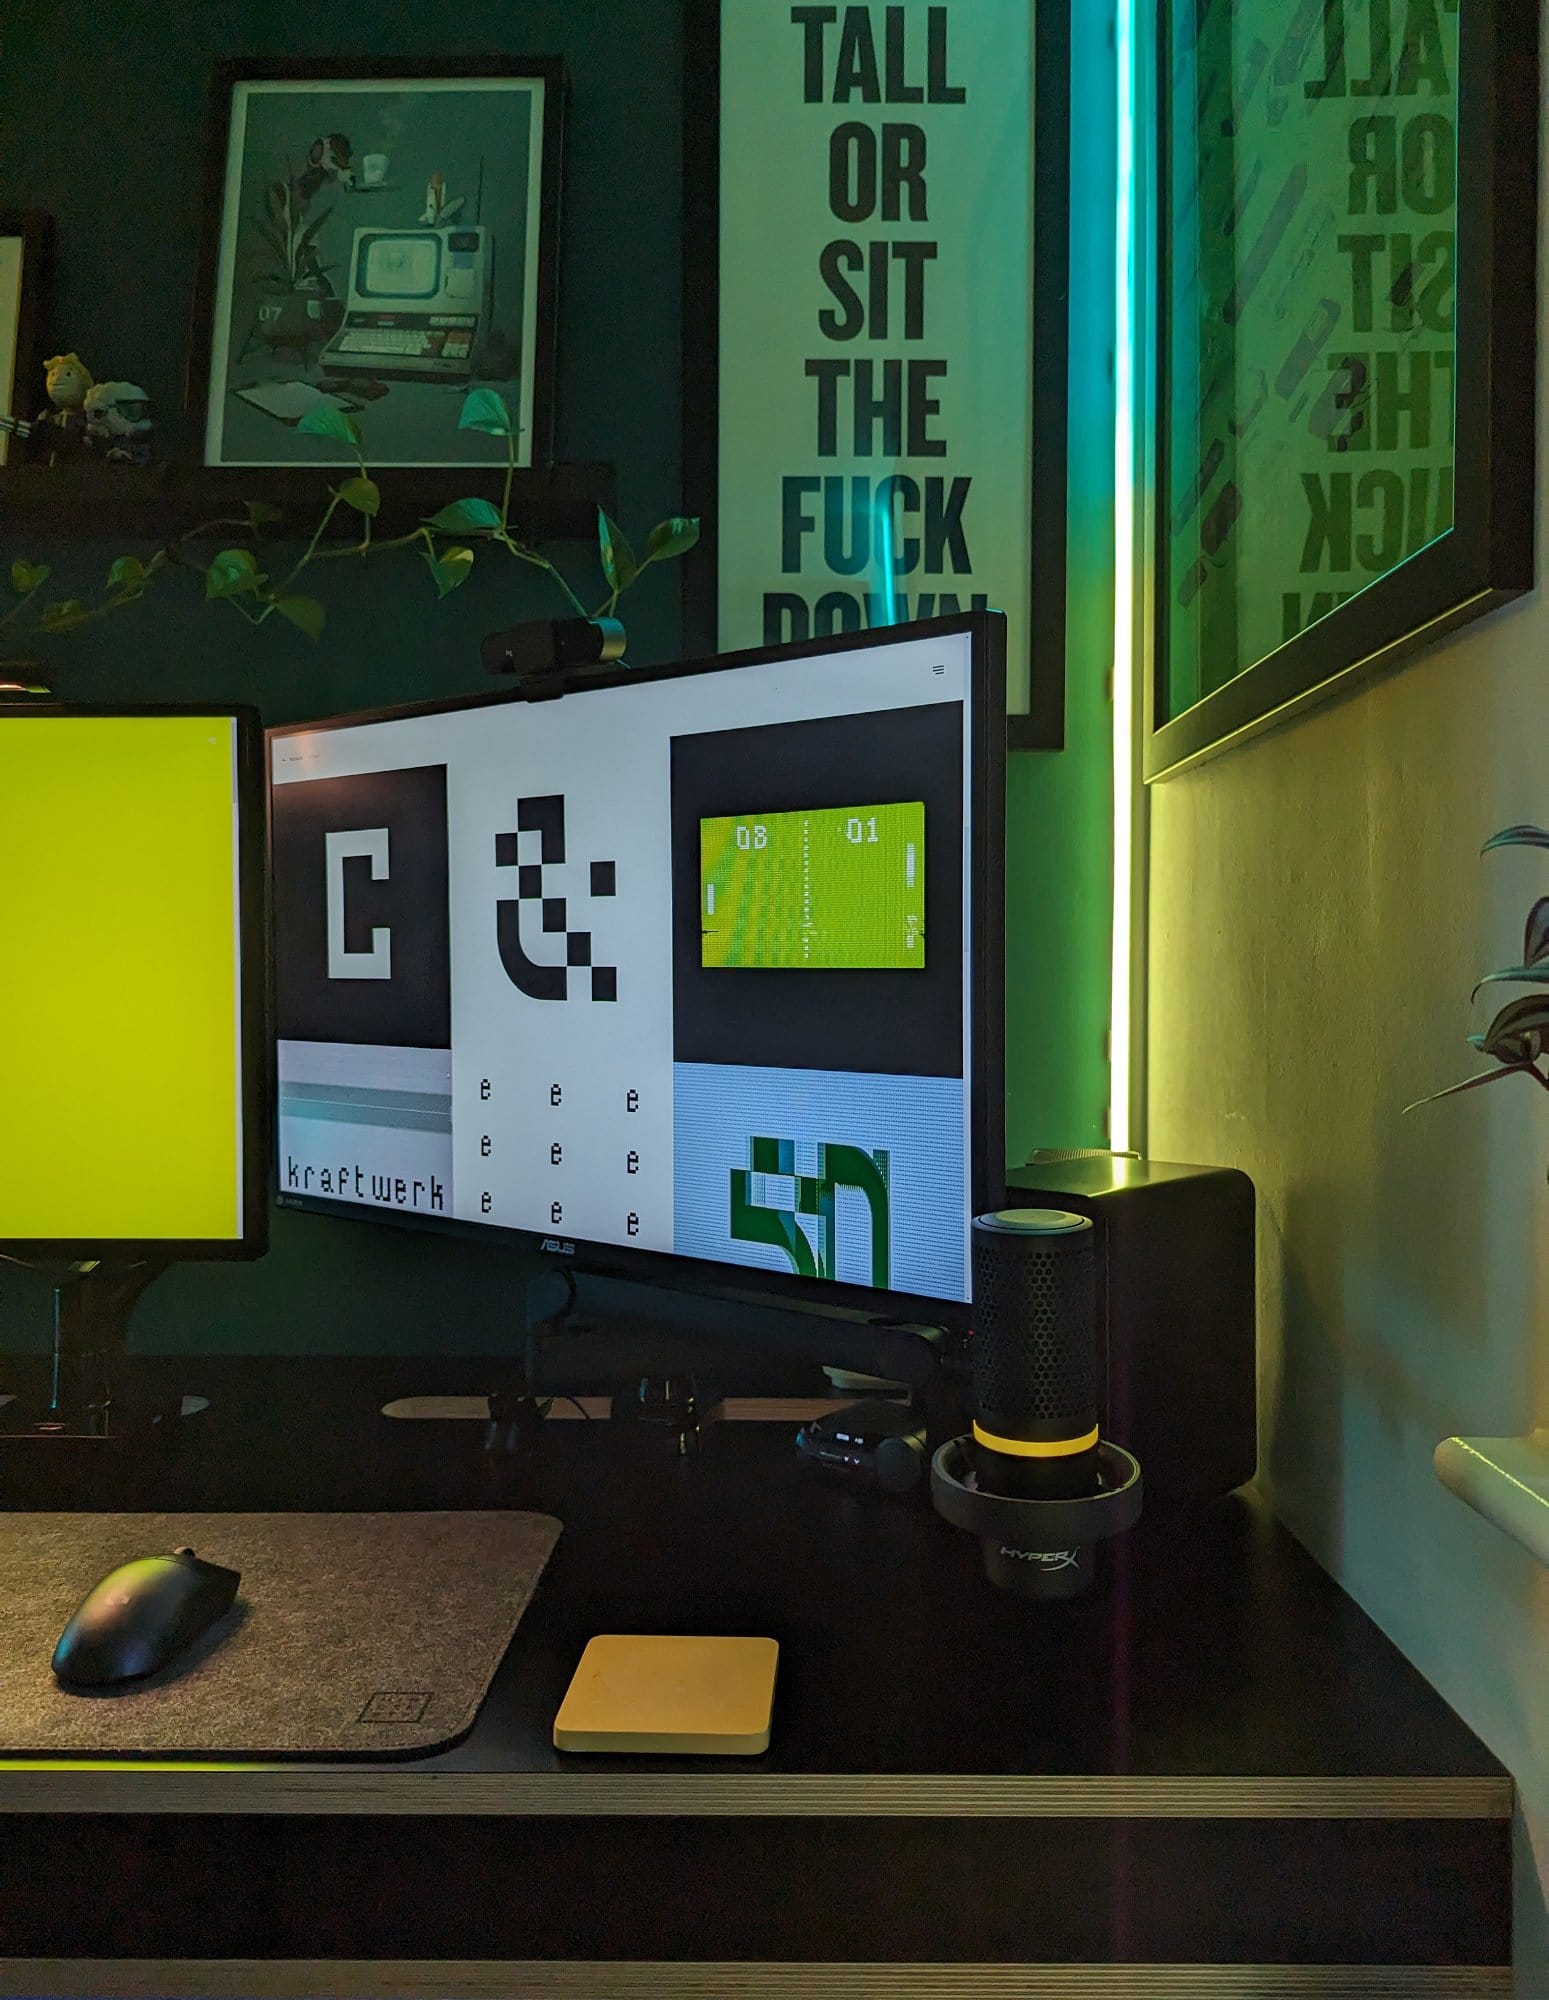 A close-up of a home office desk setup featuring a triple-monitor display, with colourful lighting, framed art, and motivational posters in the background, alongside a mouse and a microphone on the desk